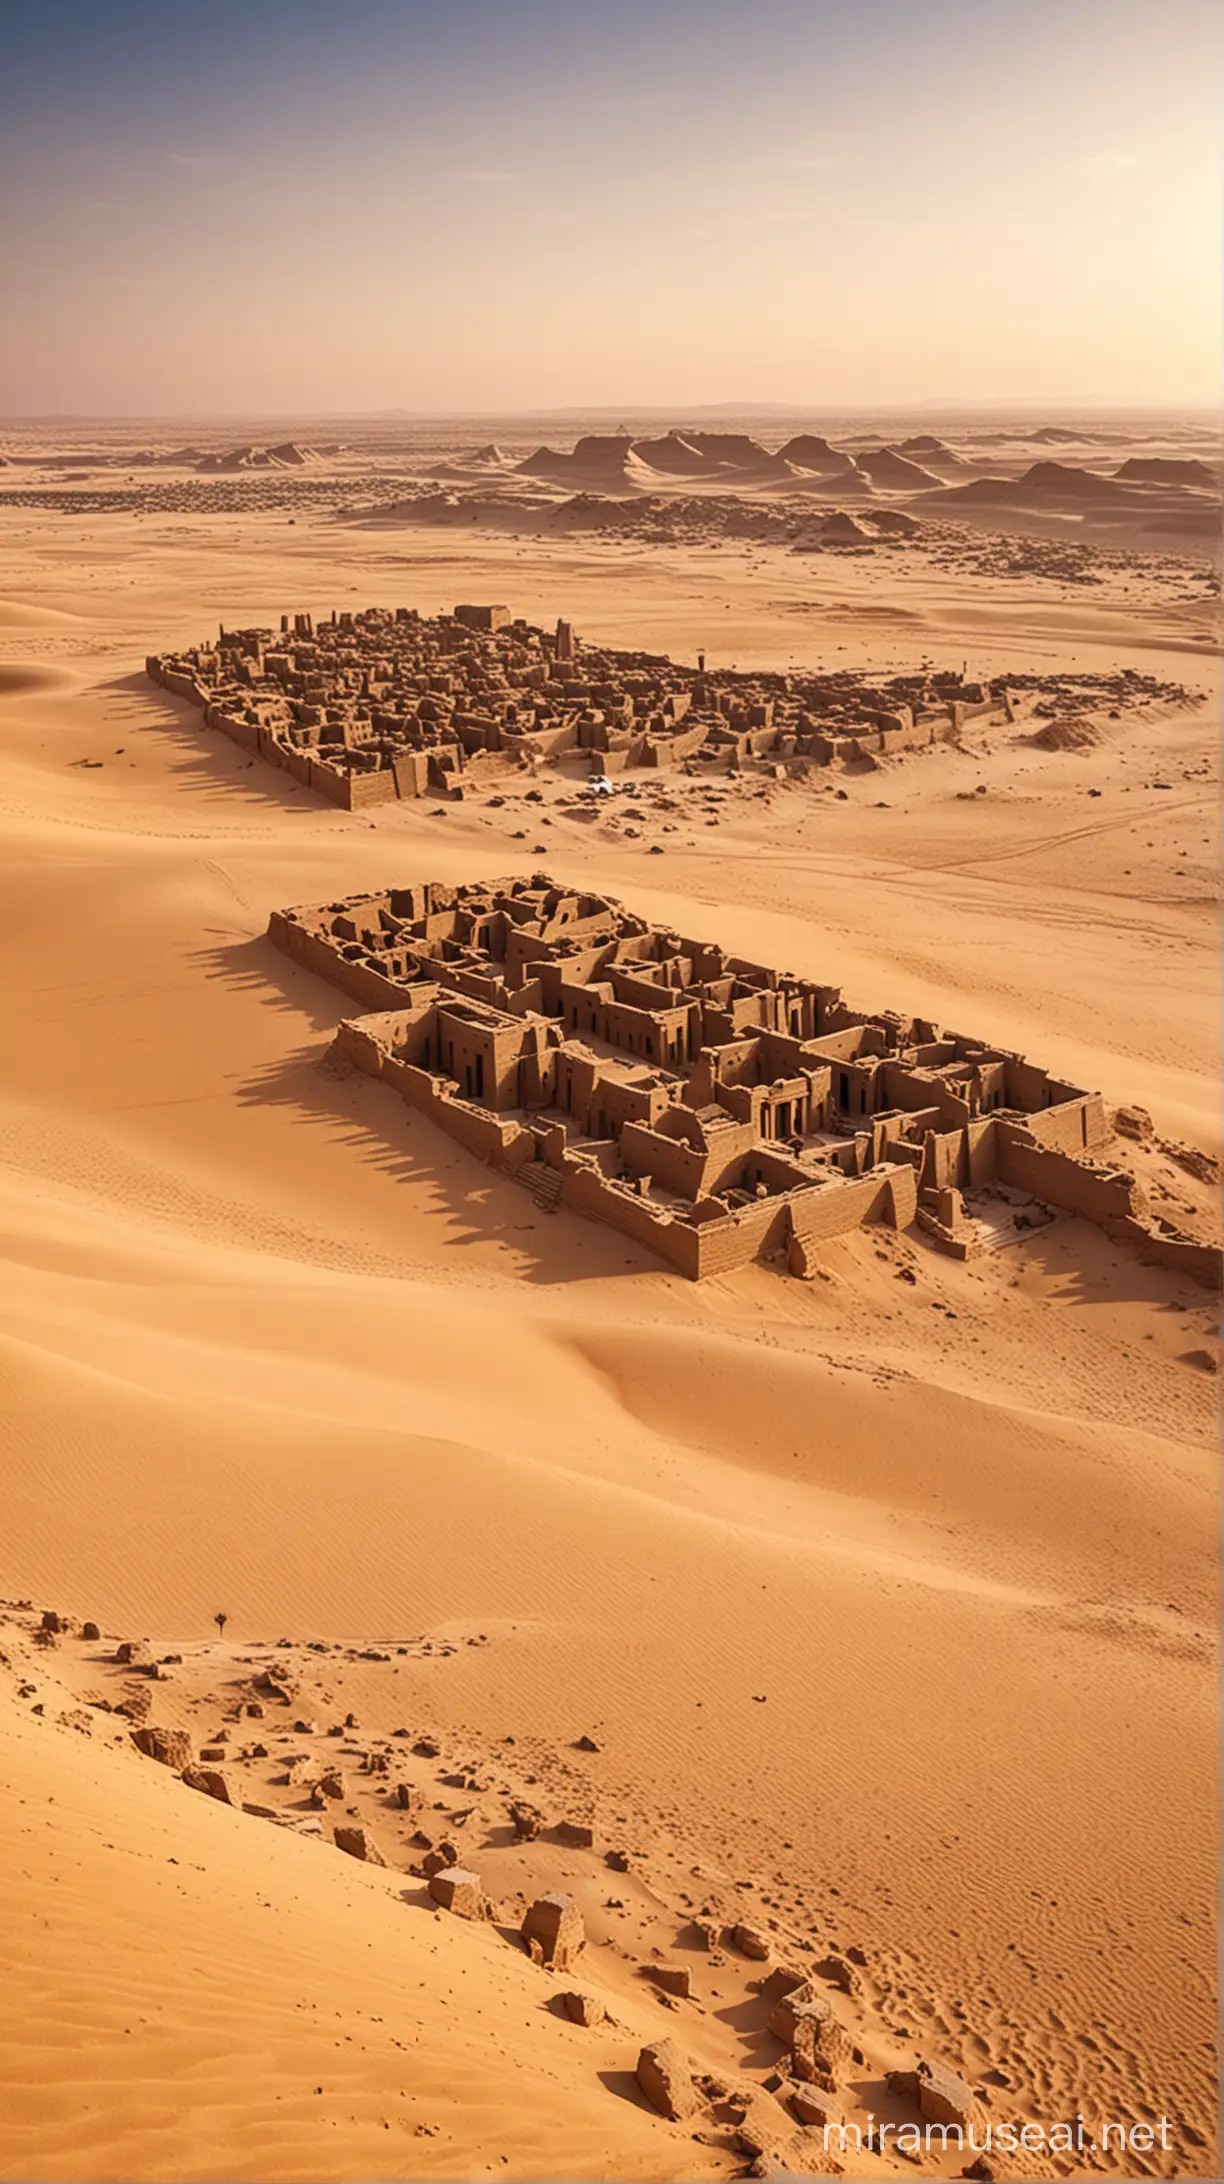 Visualize the vast Egyptian desert with ancient ruins peeking through the golden sands, hiding secrets from the past.
